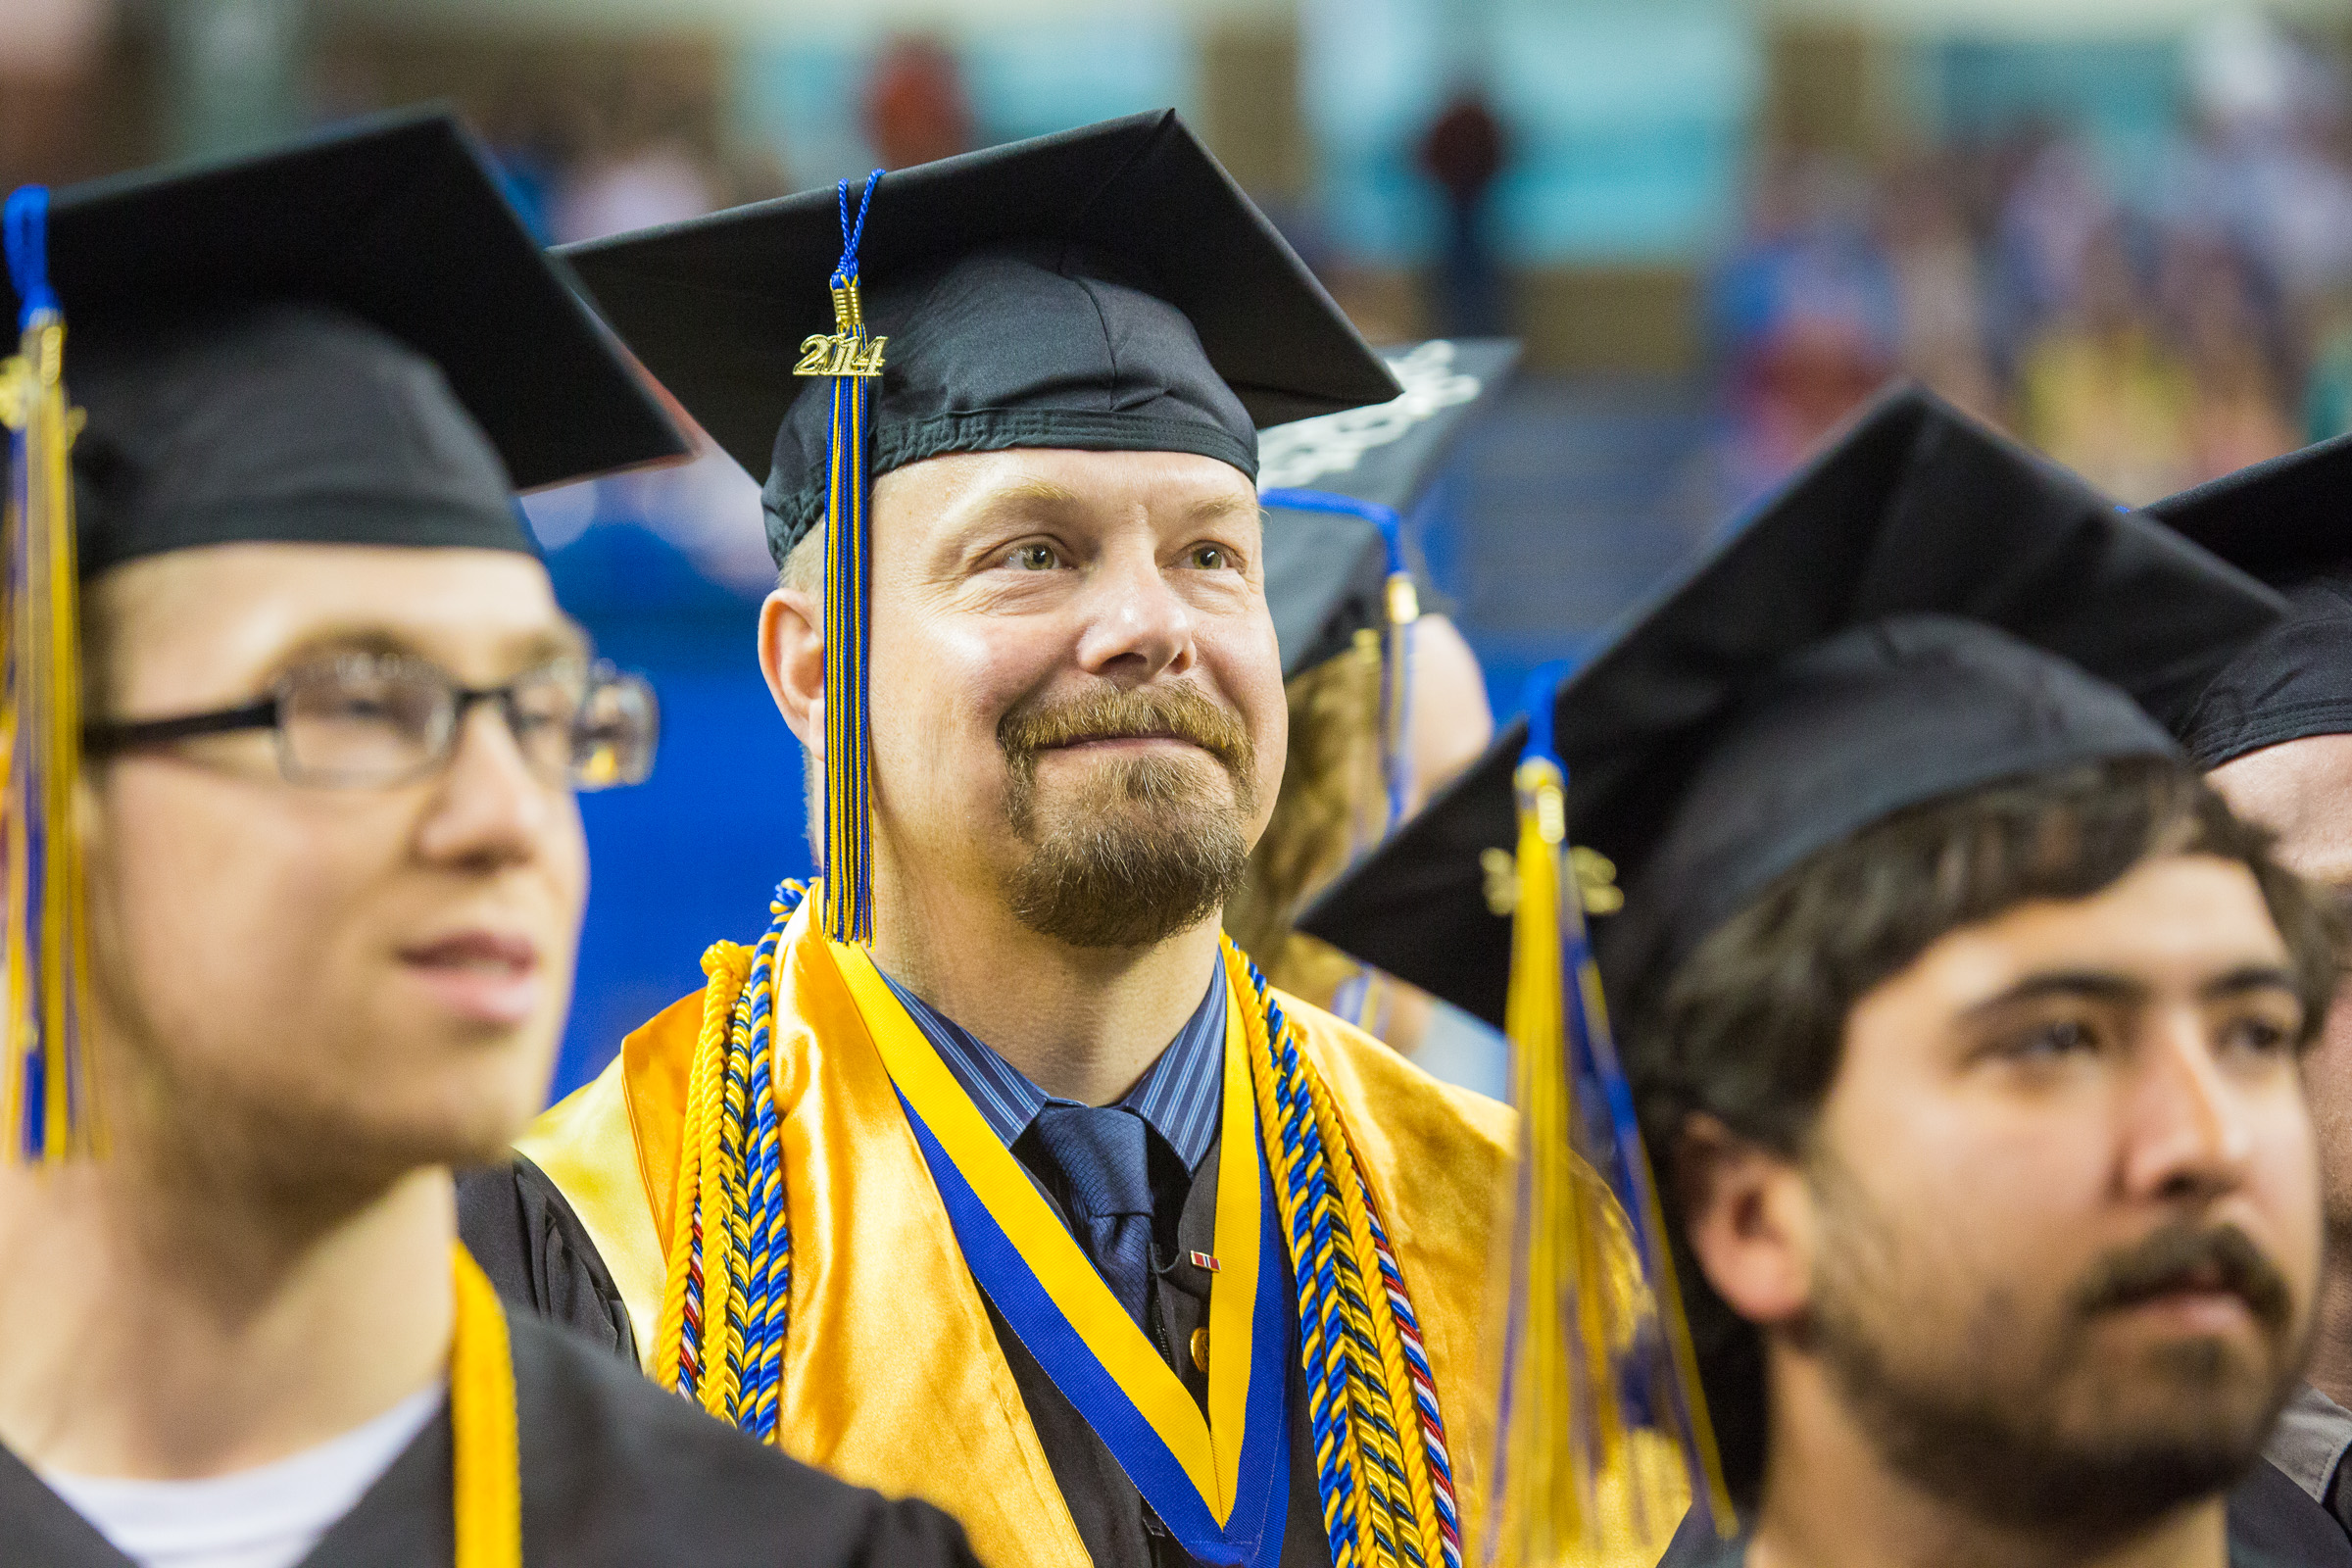 Troy Bouffard is all smiles after returning to his seat during the 2014 Commencement Ceremony Sunday, May 11, 2014 at the Carlson Center. Bouffard received a B.A., in Political Science, cum laude. | UAF Photo by JR Ancheta